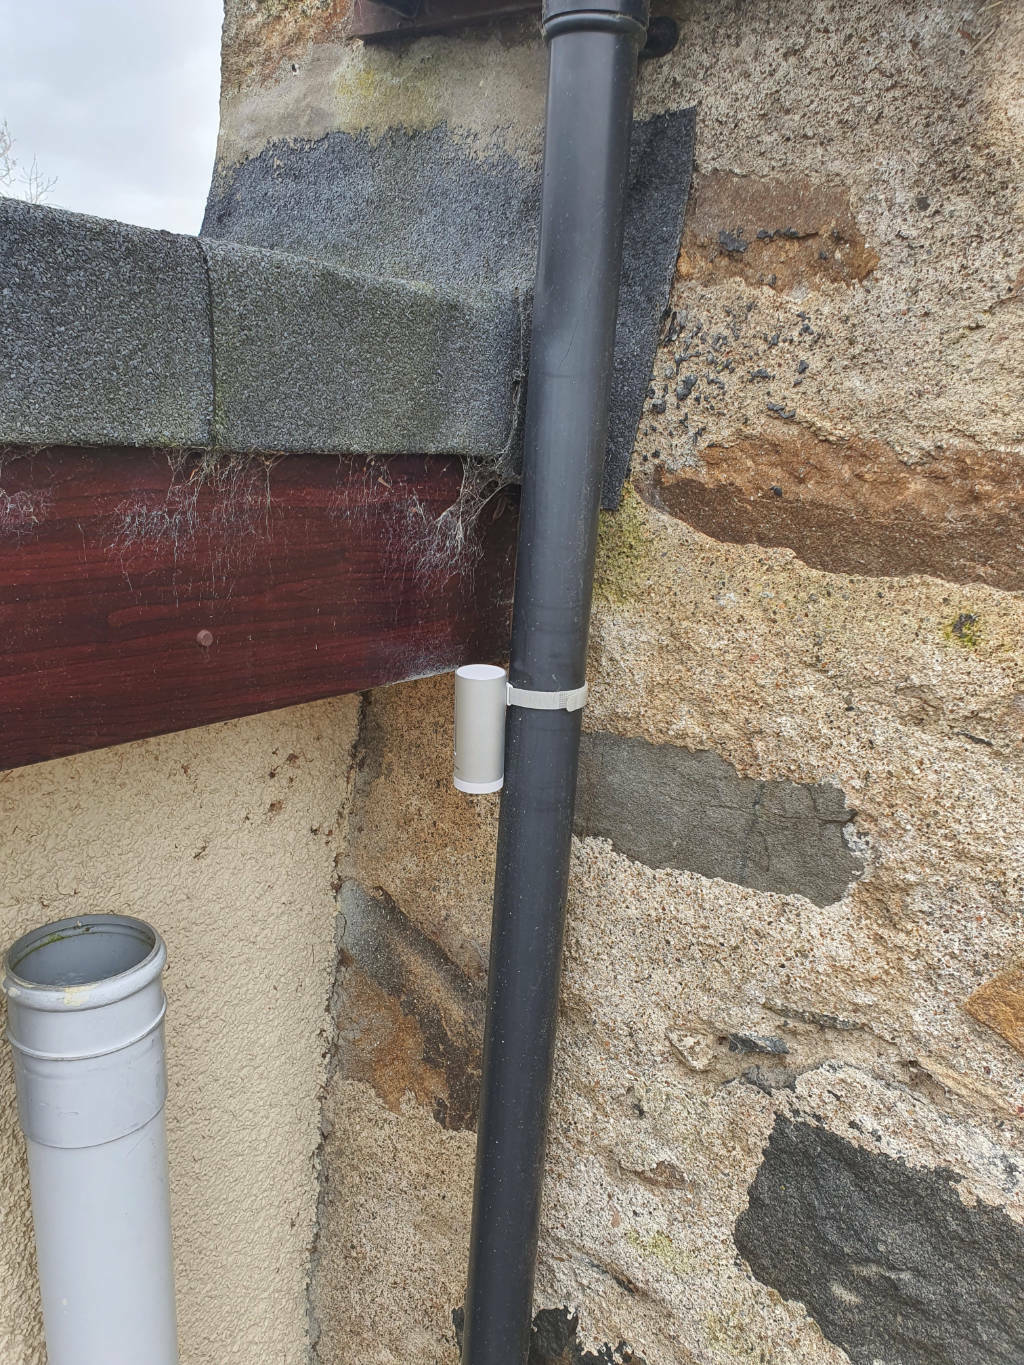 Photo of the Netatmo outdoor unit mounted to a drain pipe